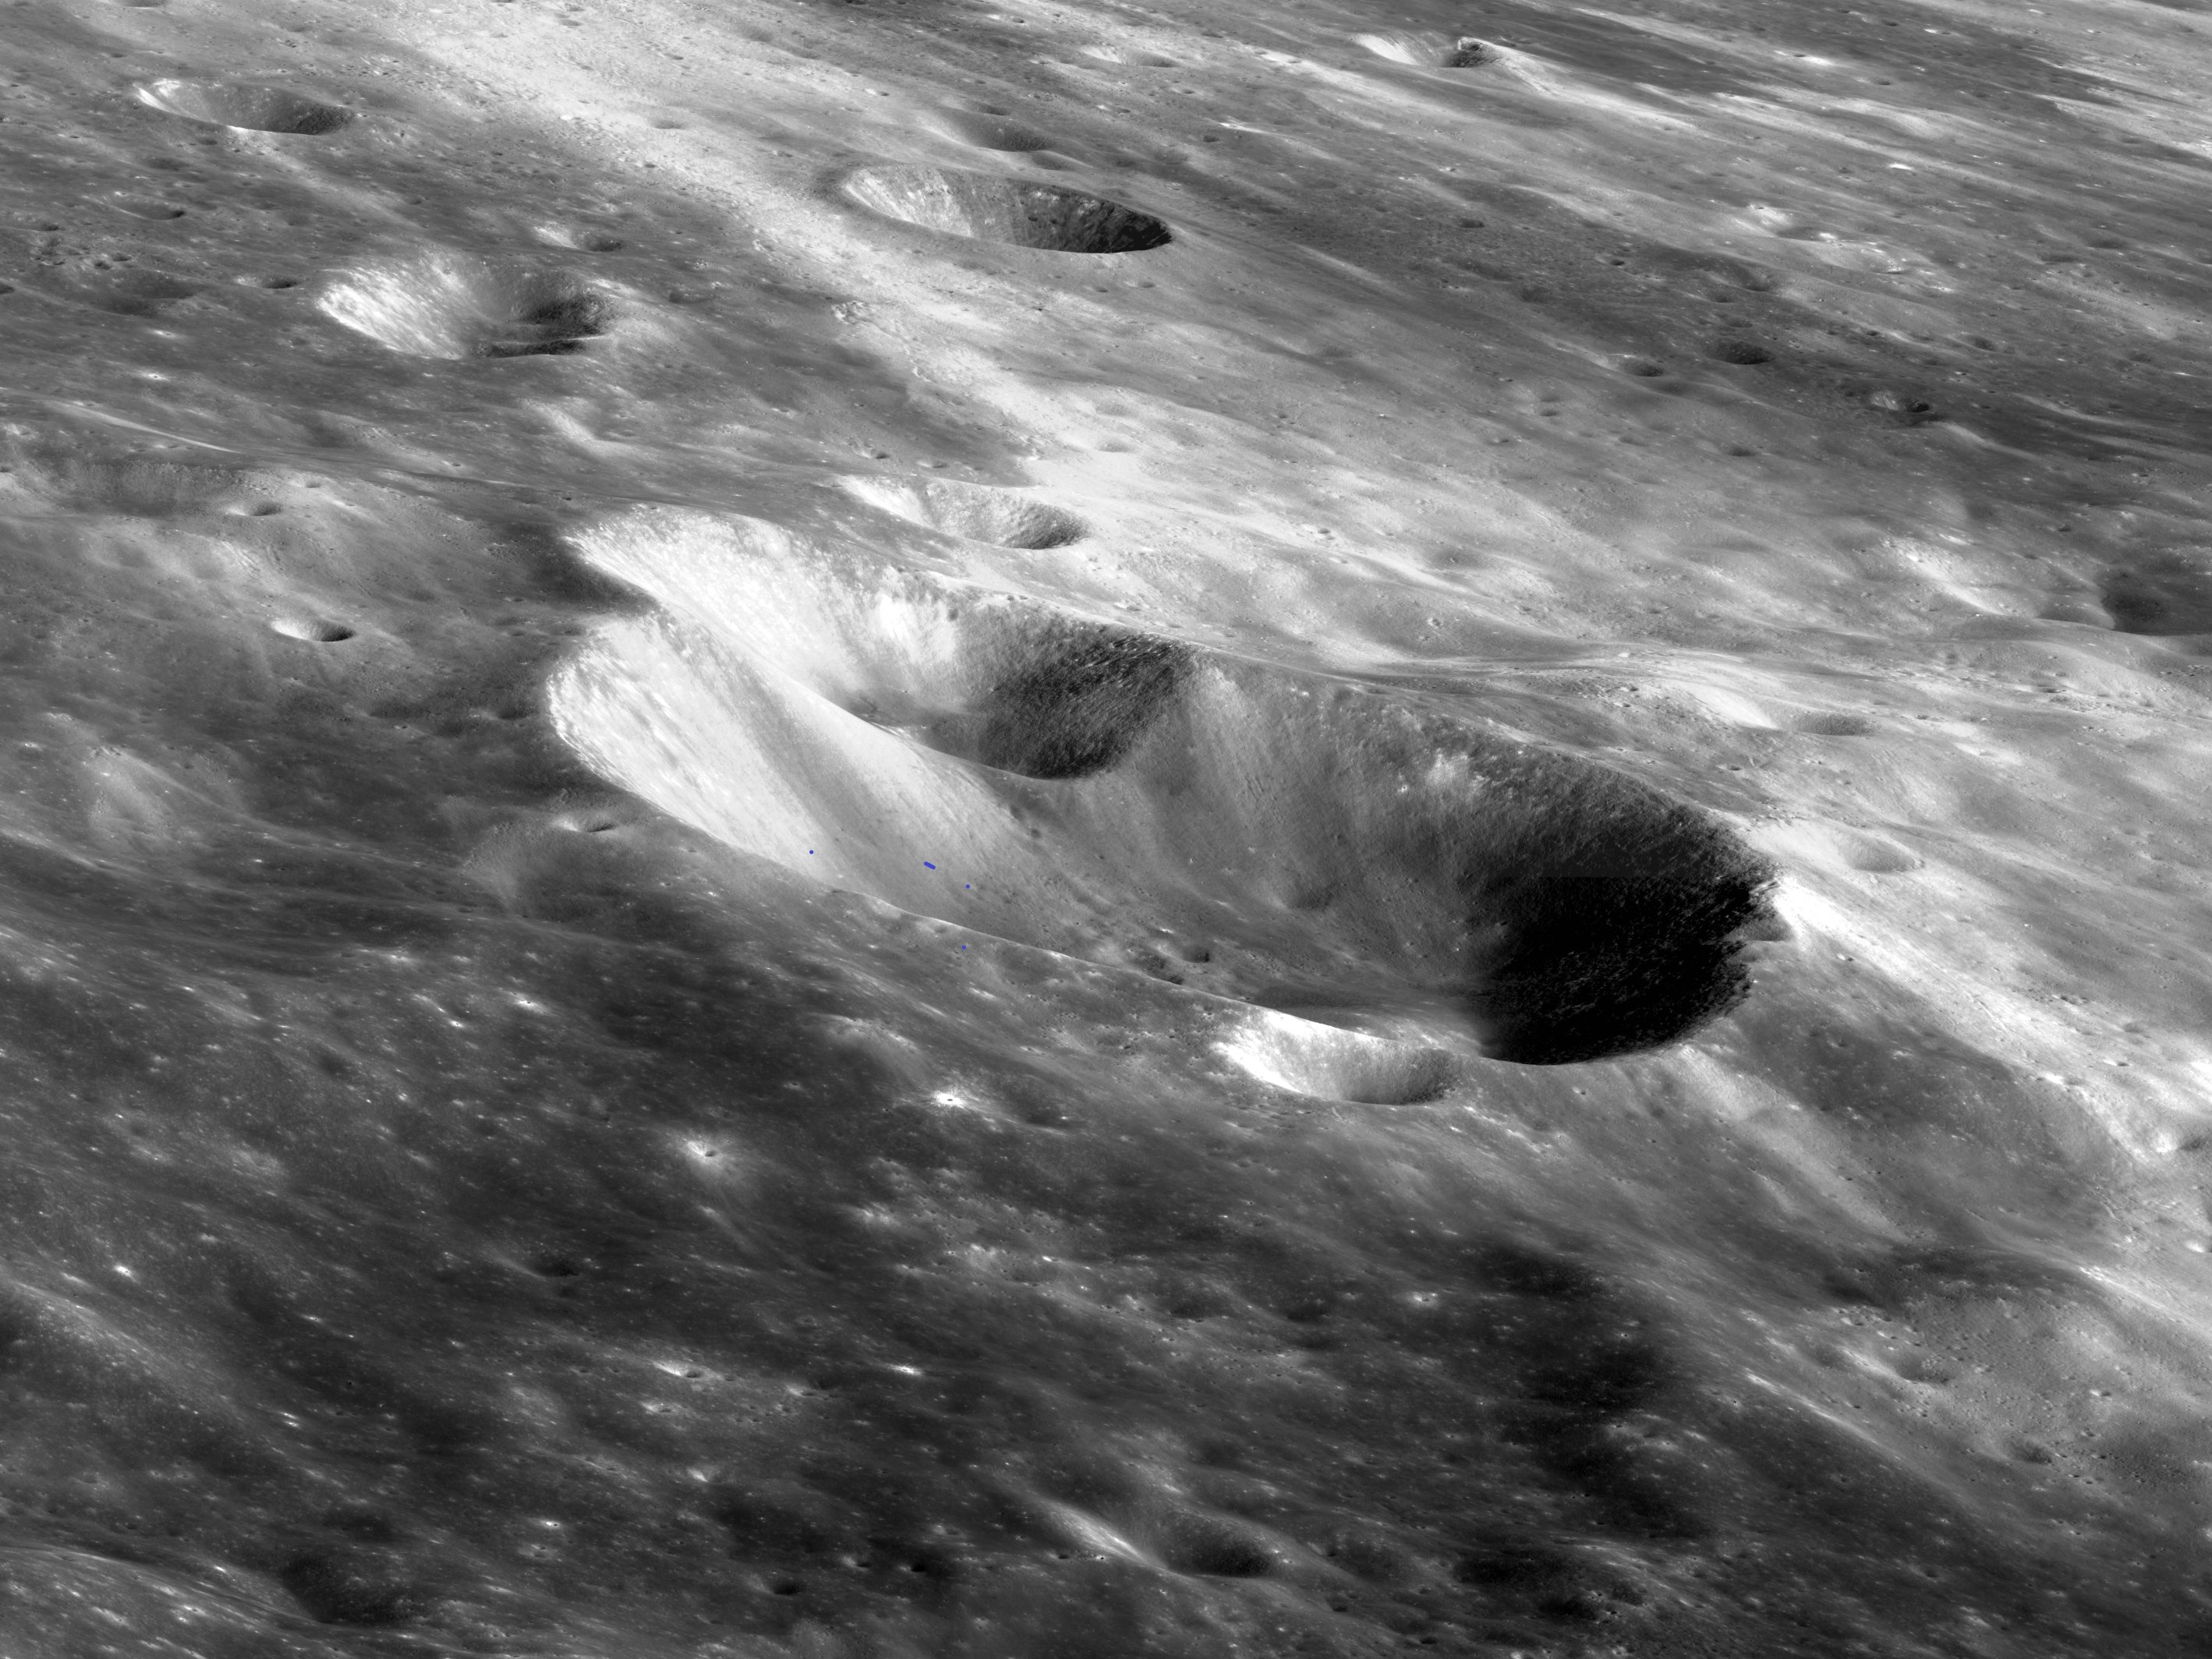 various geological features on the moon